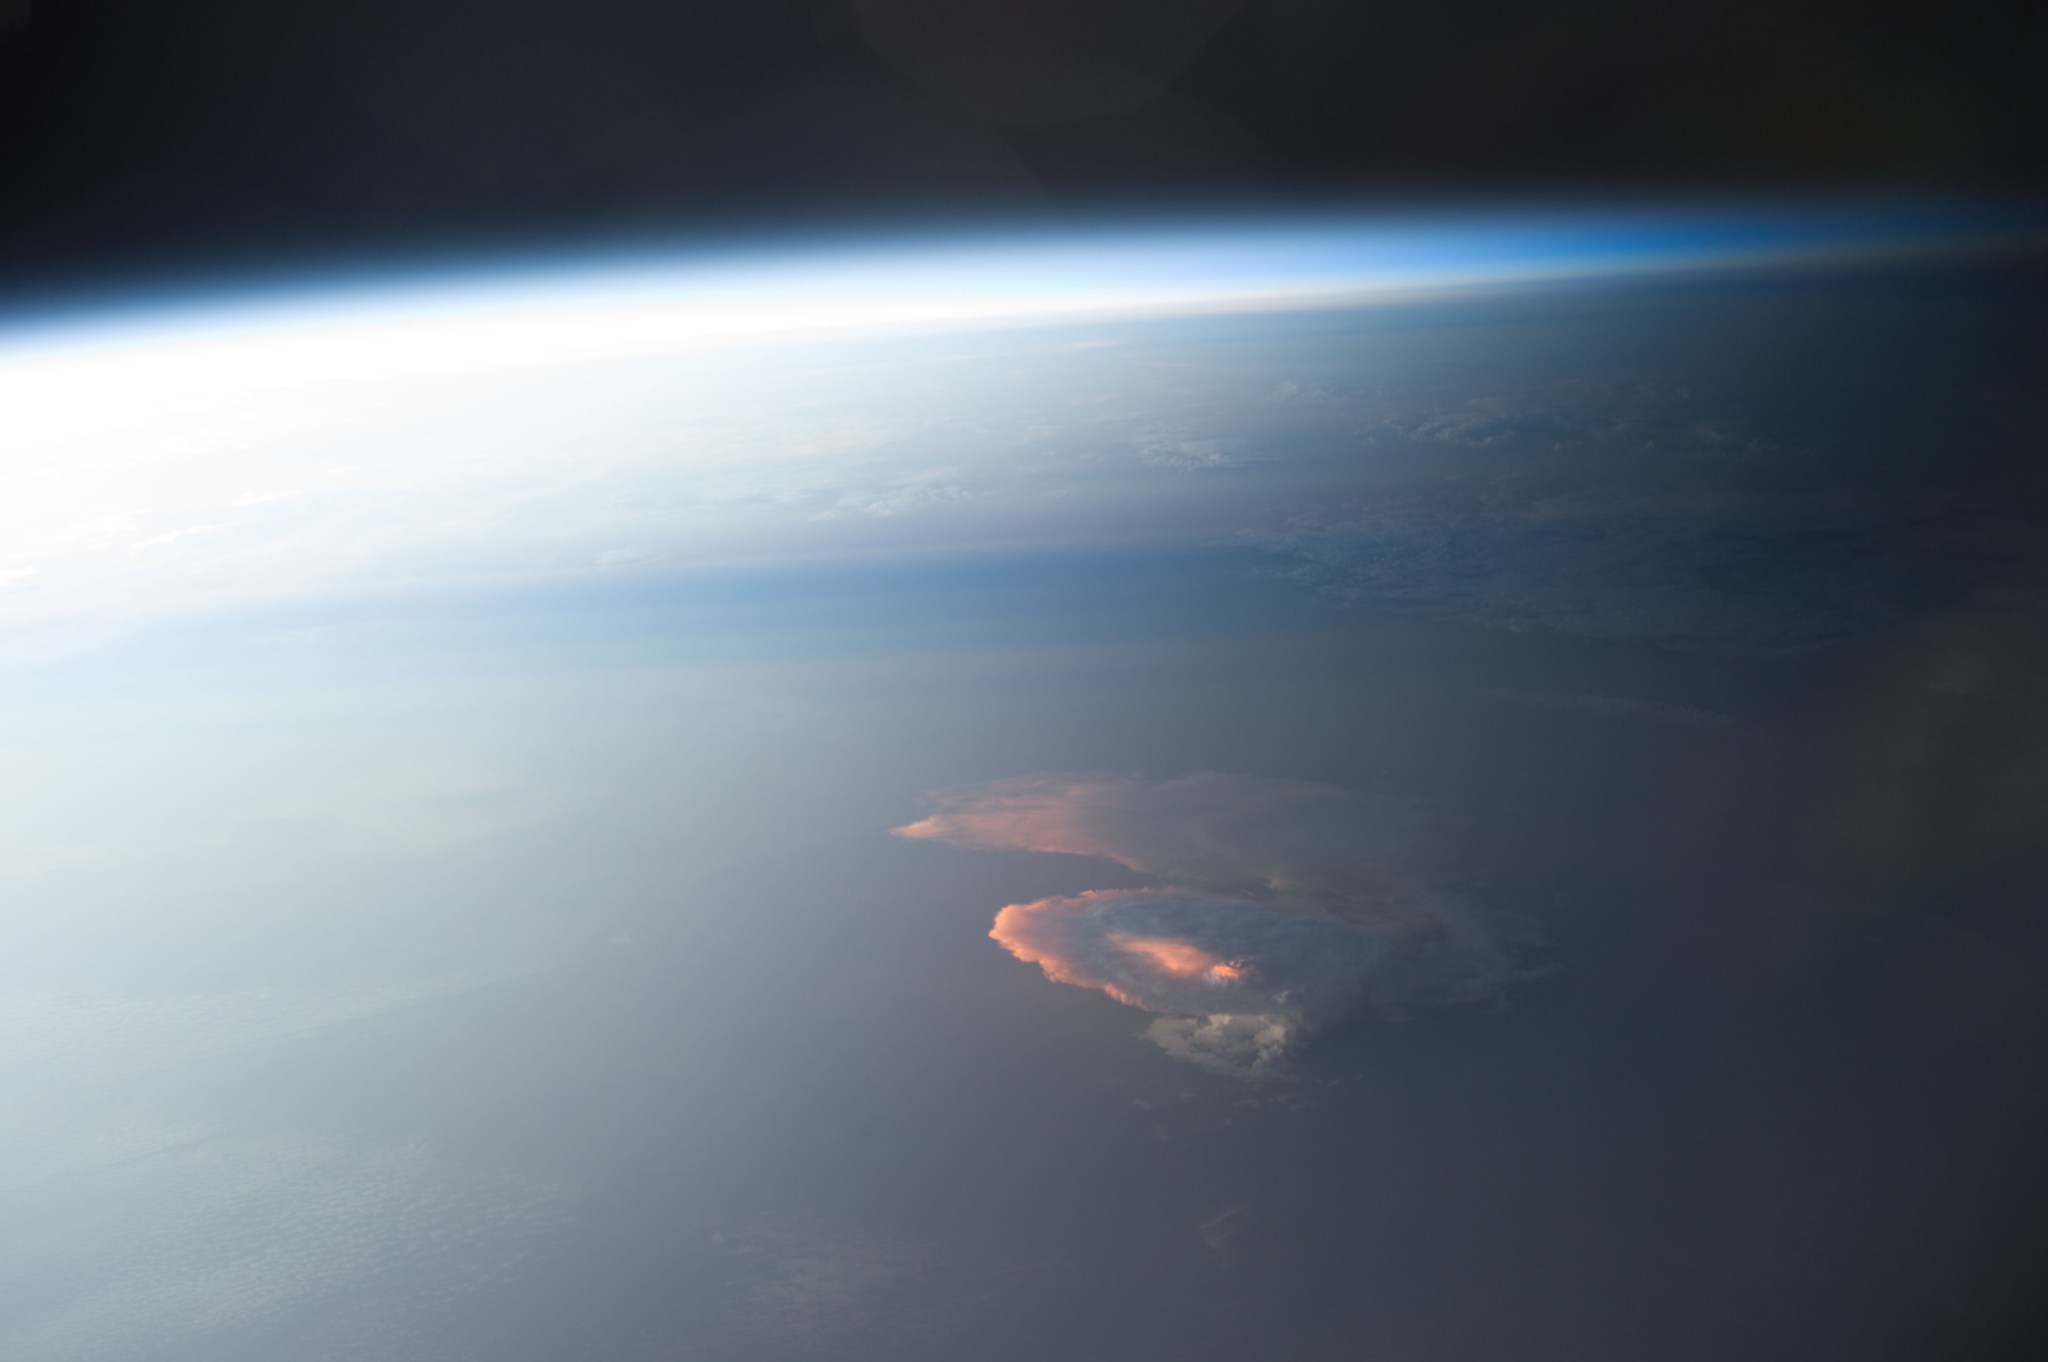 Earth Observation taken during a day pass by the Expedition 40 crew aboard the International Space Station (ISS). Folder lists this as: Afterglow on clouds. Also sent as Twitter message: Sun highlights a storm from underneath.